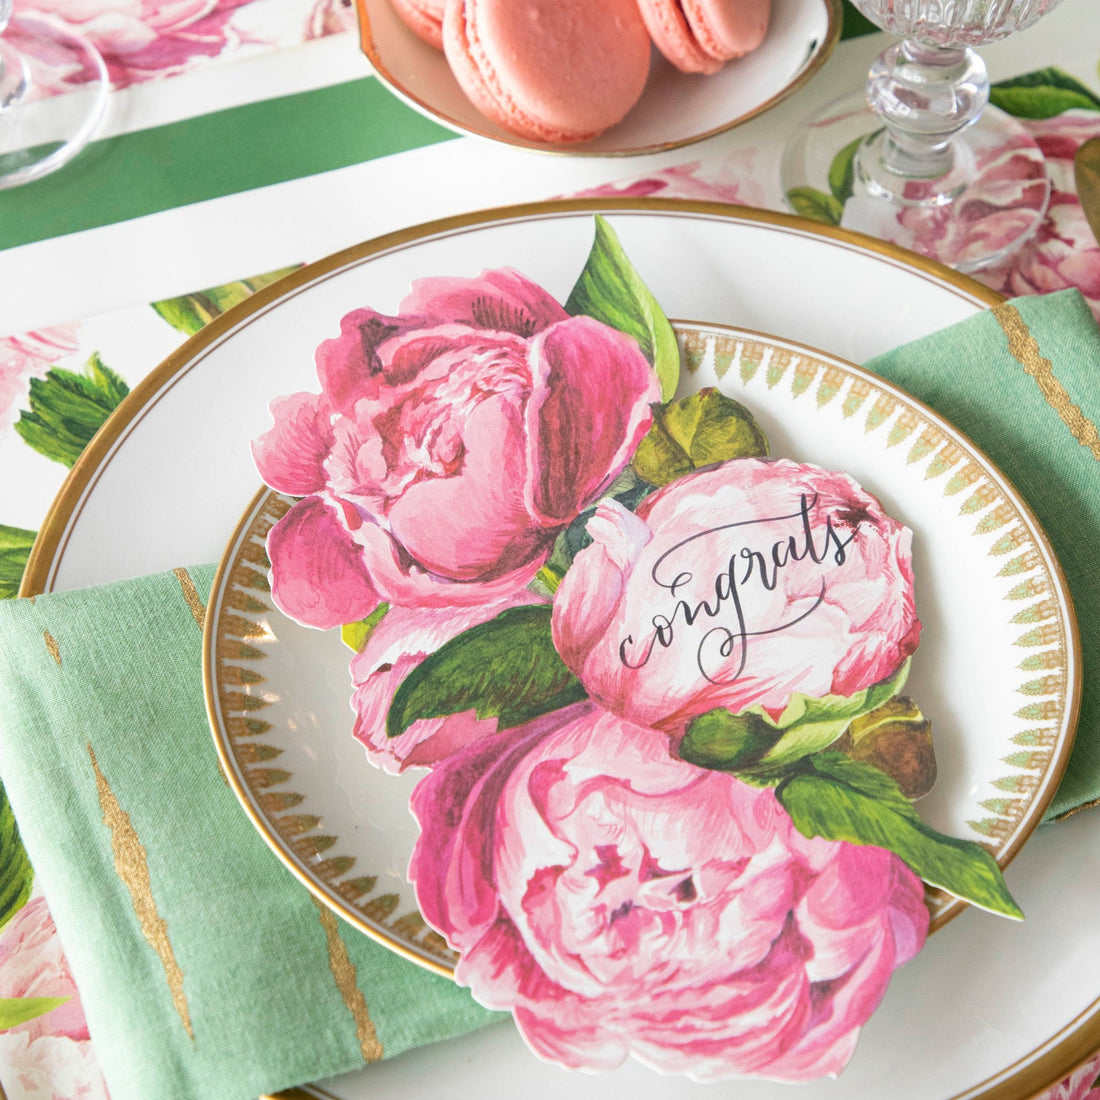 An elegant place setting featuring a Peony Table Accent with &quot;congrats&quot; written on it resting on the plate.